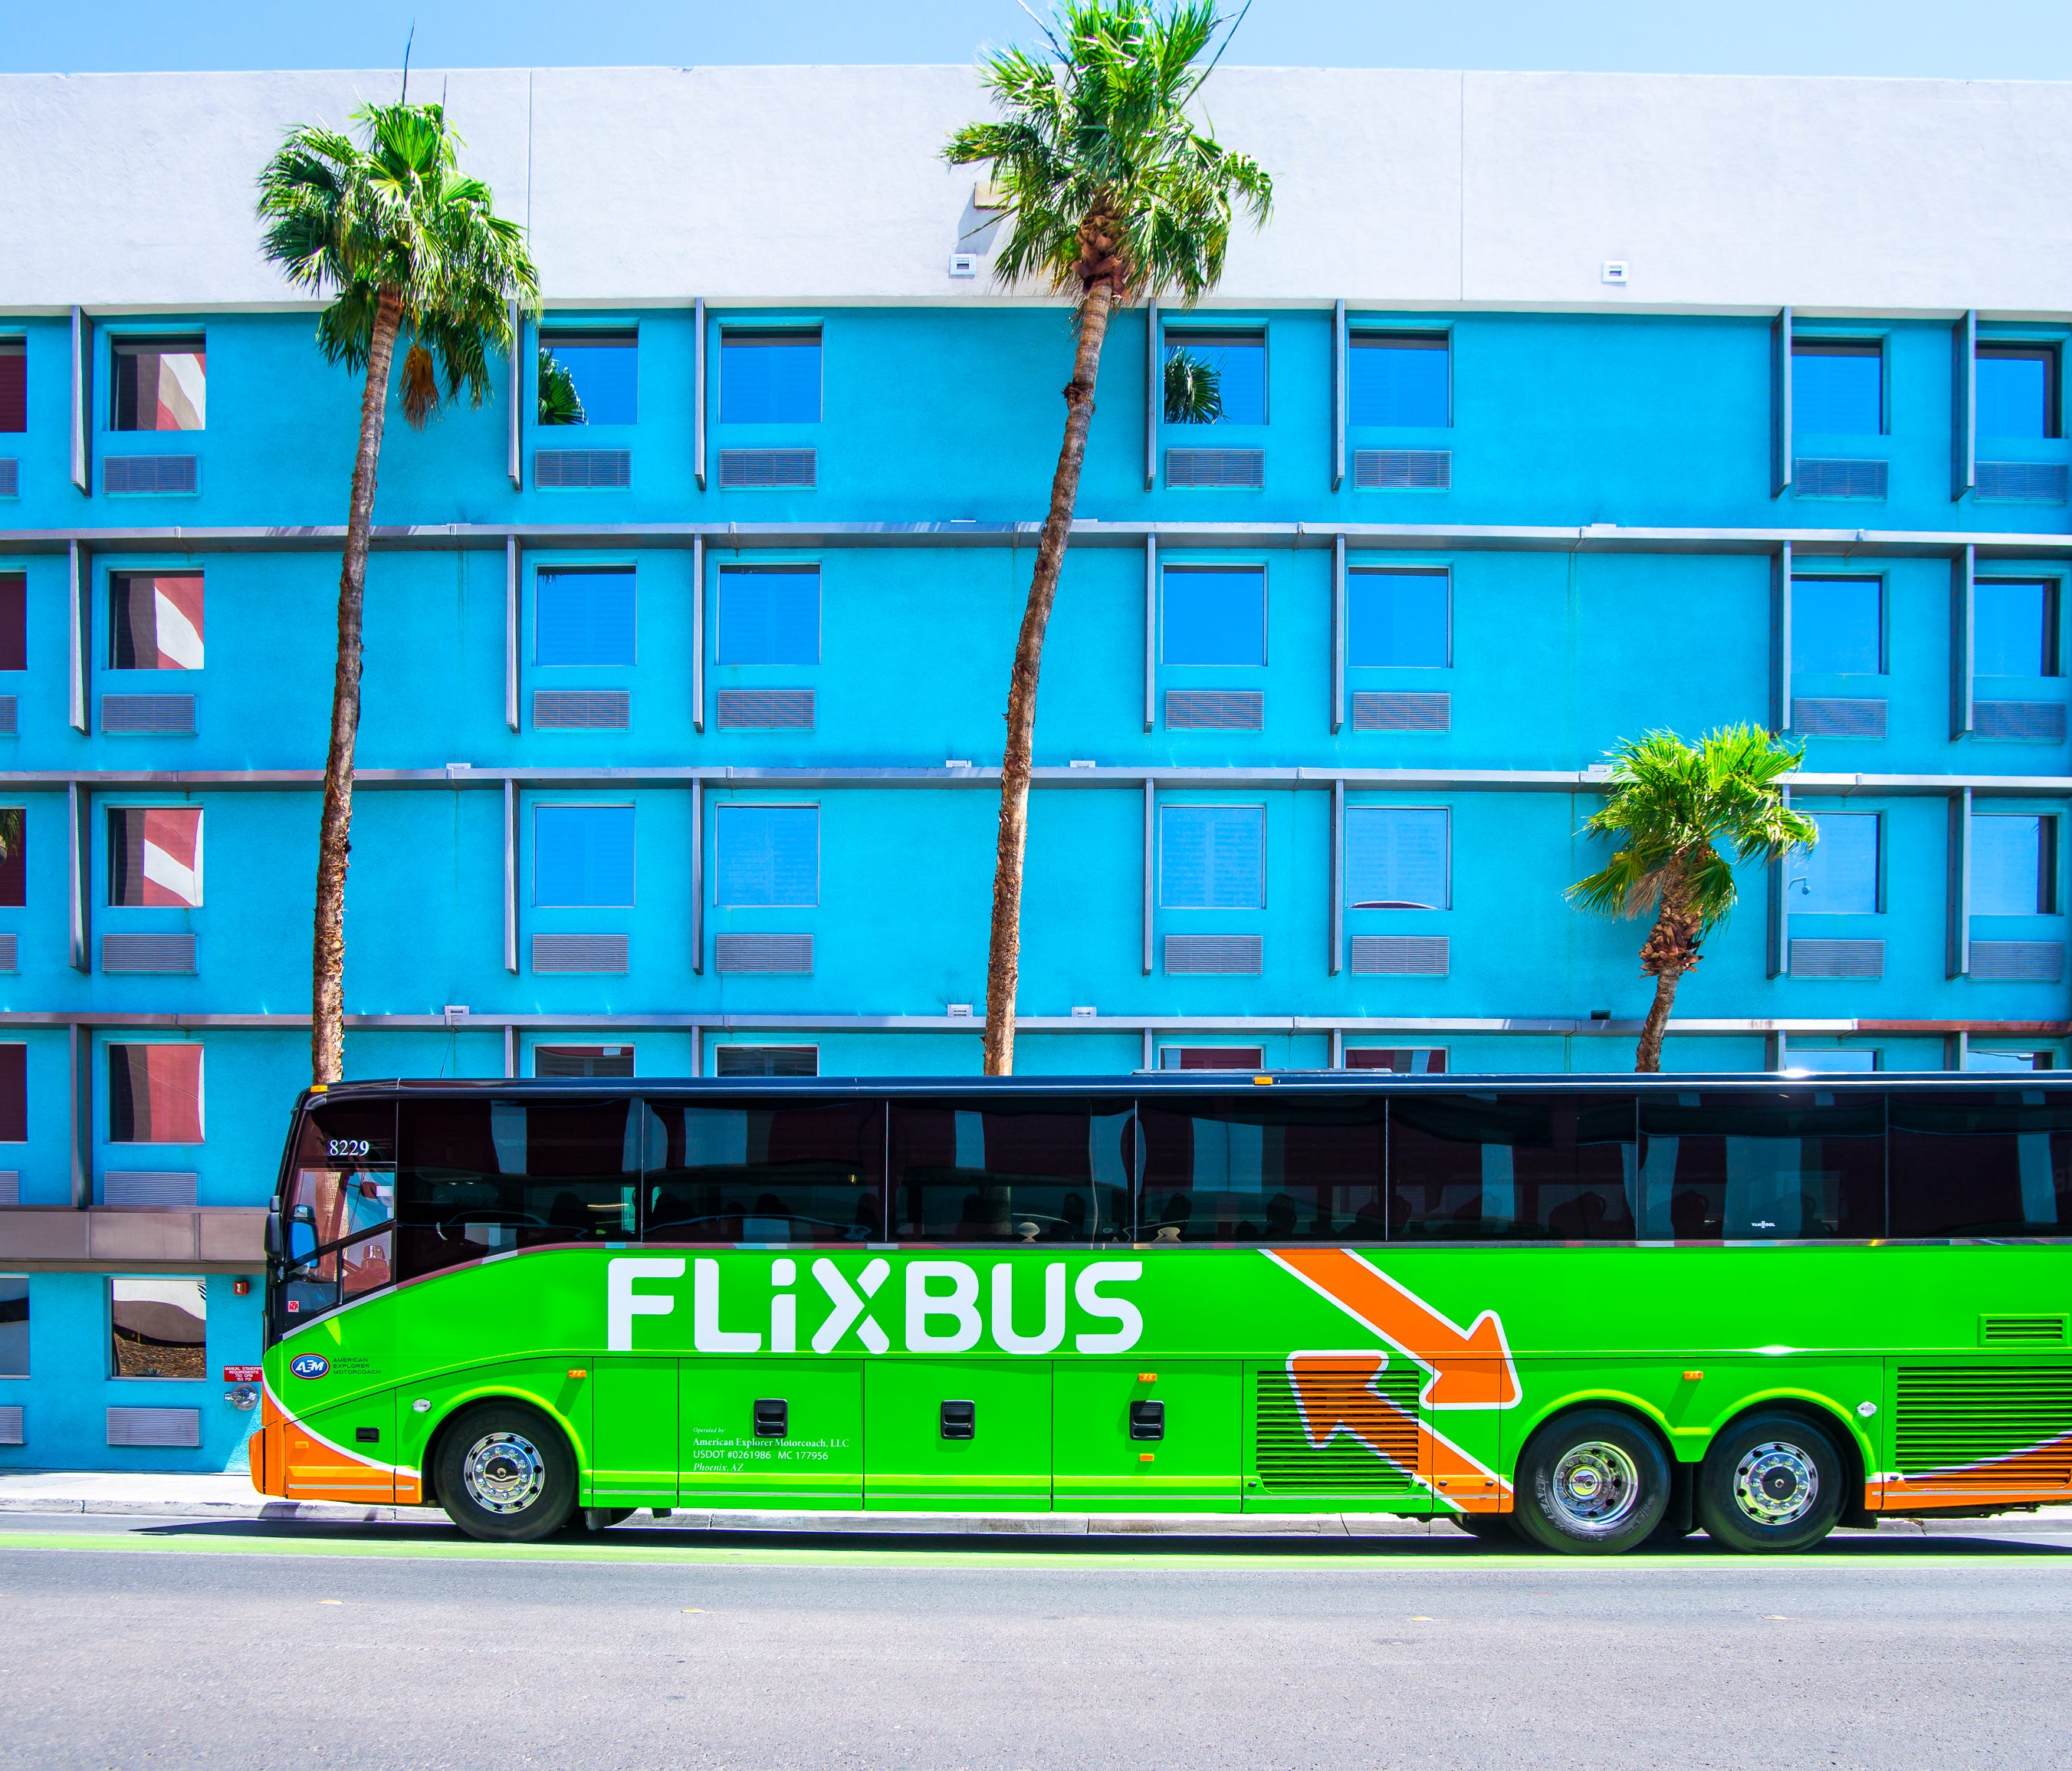 Flixbus' signature green and orange buses have become  staple on European streets since the transportation start-ups inception in 2013.